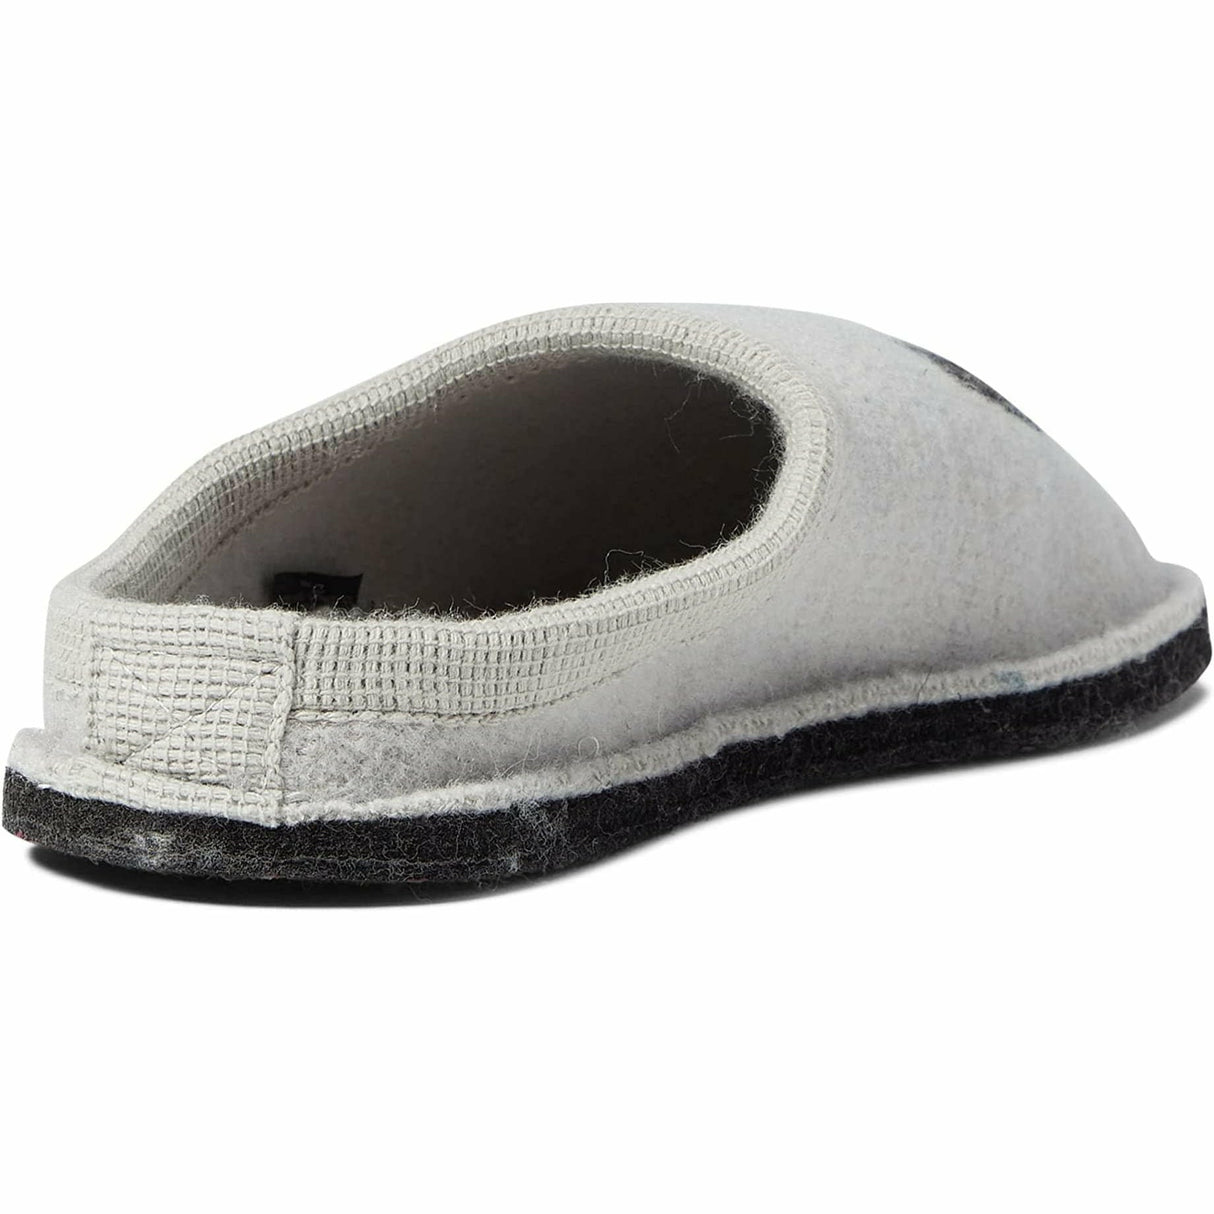 Haflinger Puppy Wool Slippers  - 